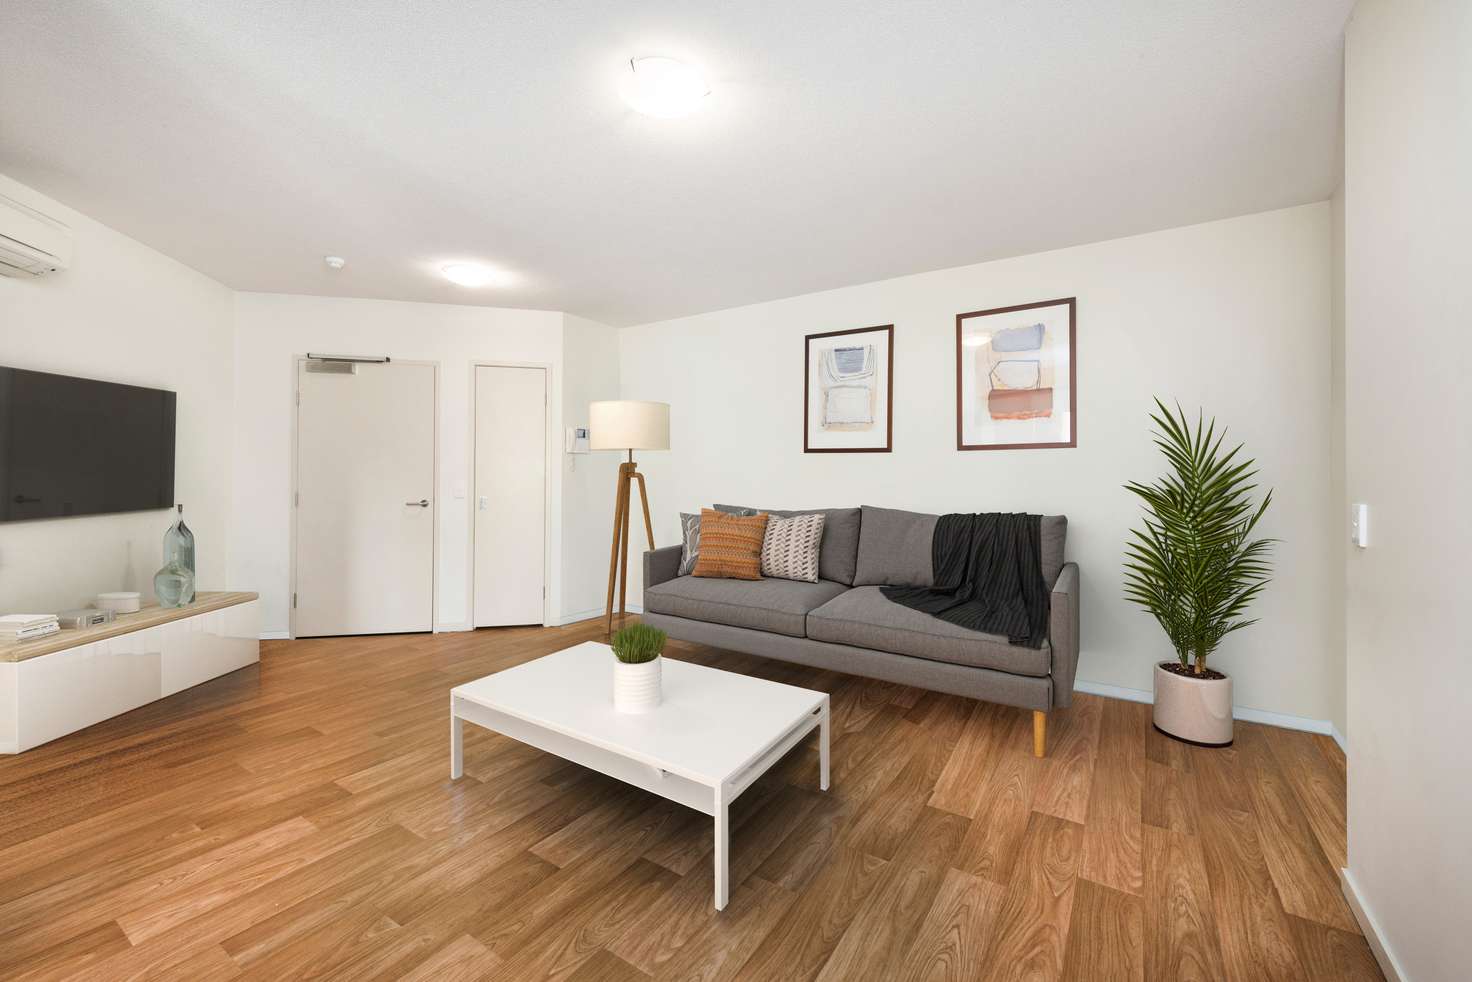 Main view of Homely apartment listing, 4606/2 Carraway Street, Kelvin Grove QLD 4059